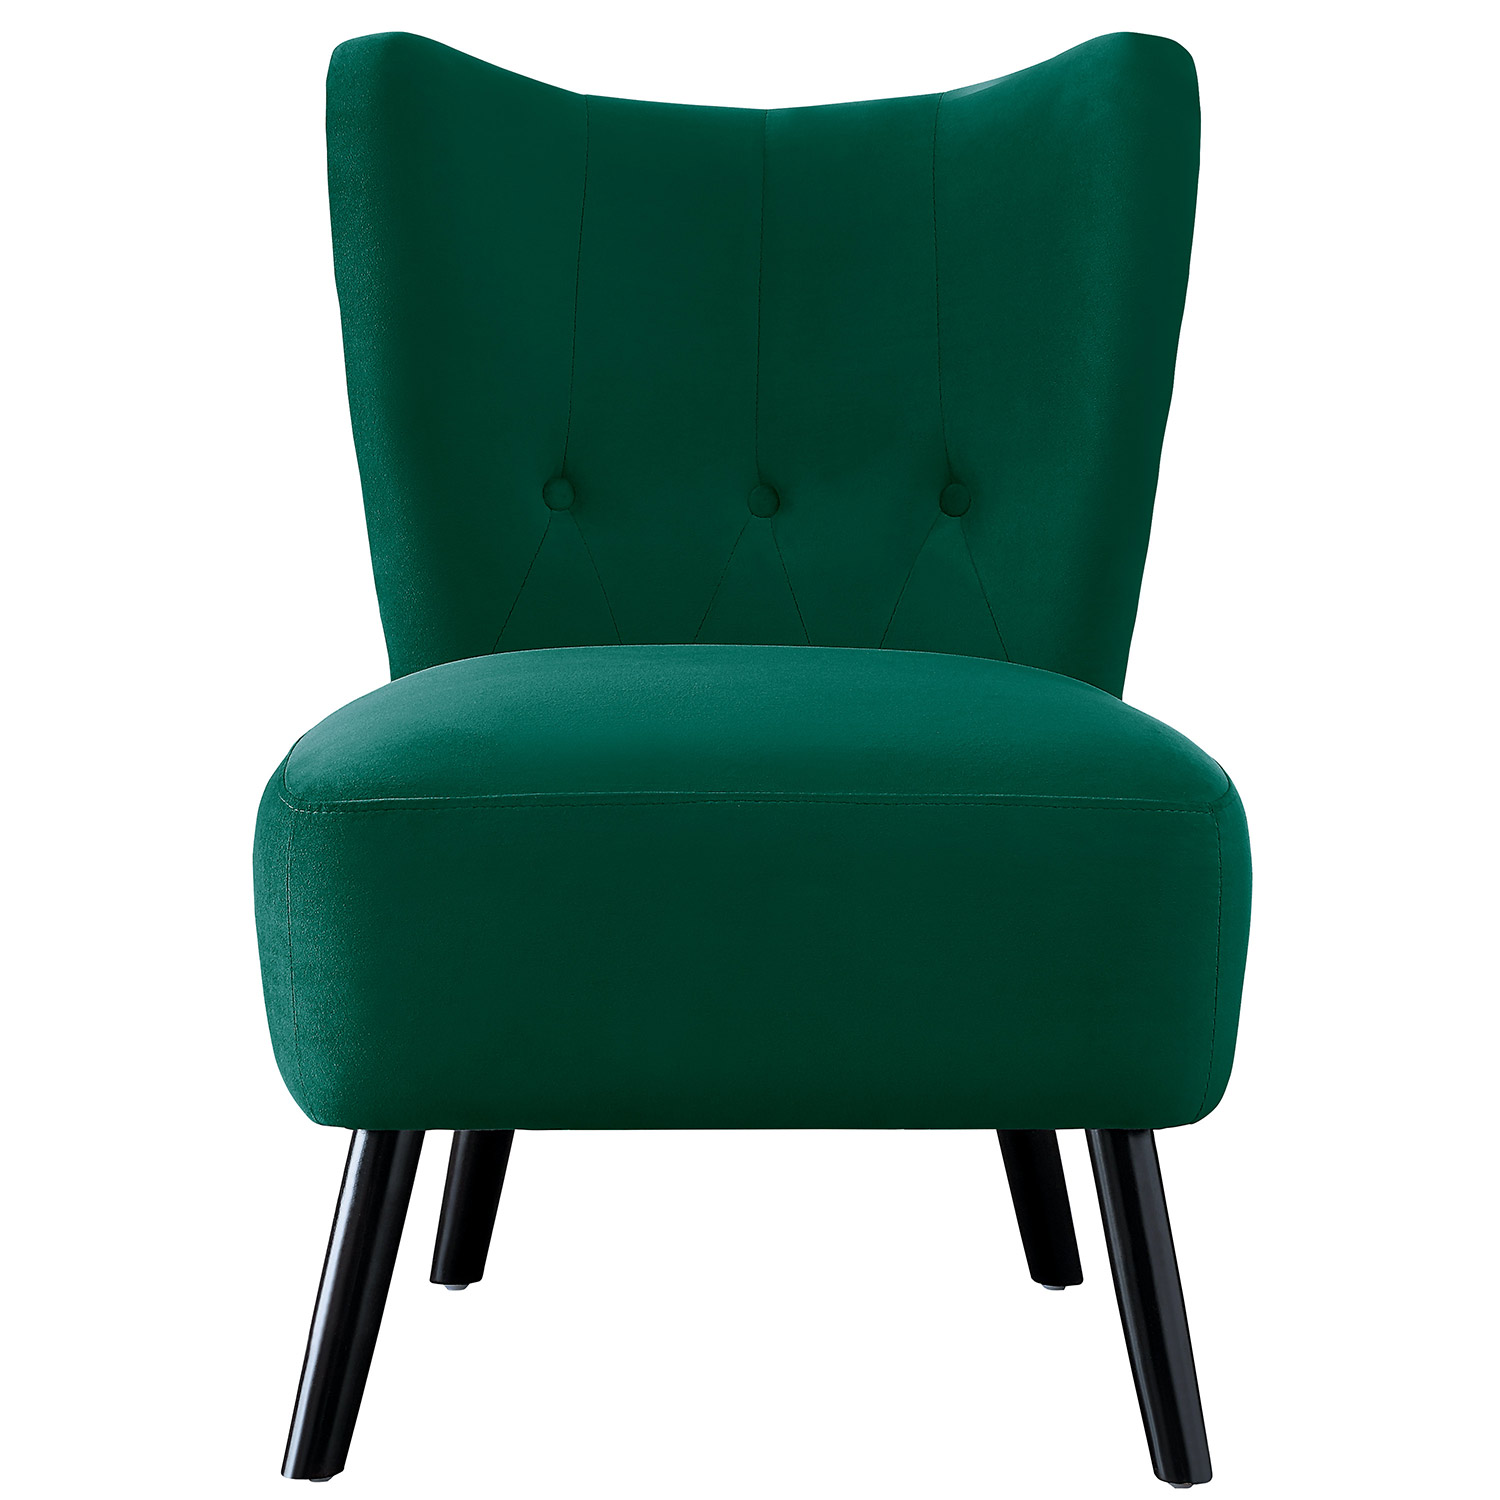 Homelegance Imani Accent Chair - Green